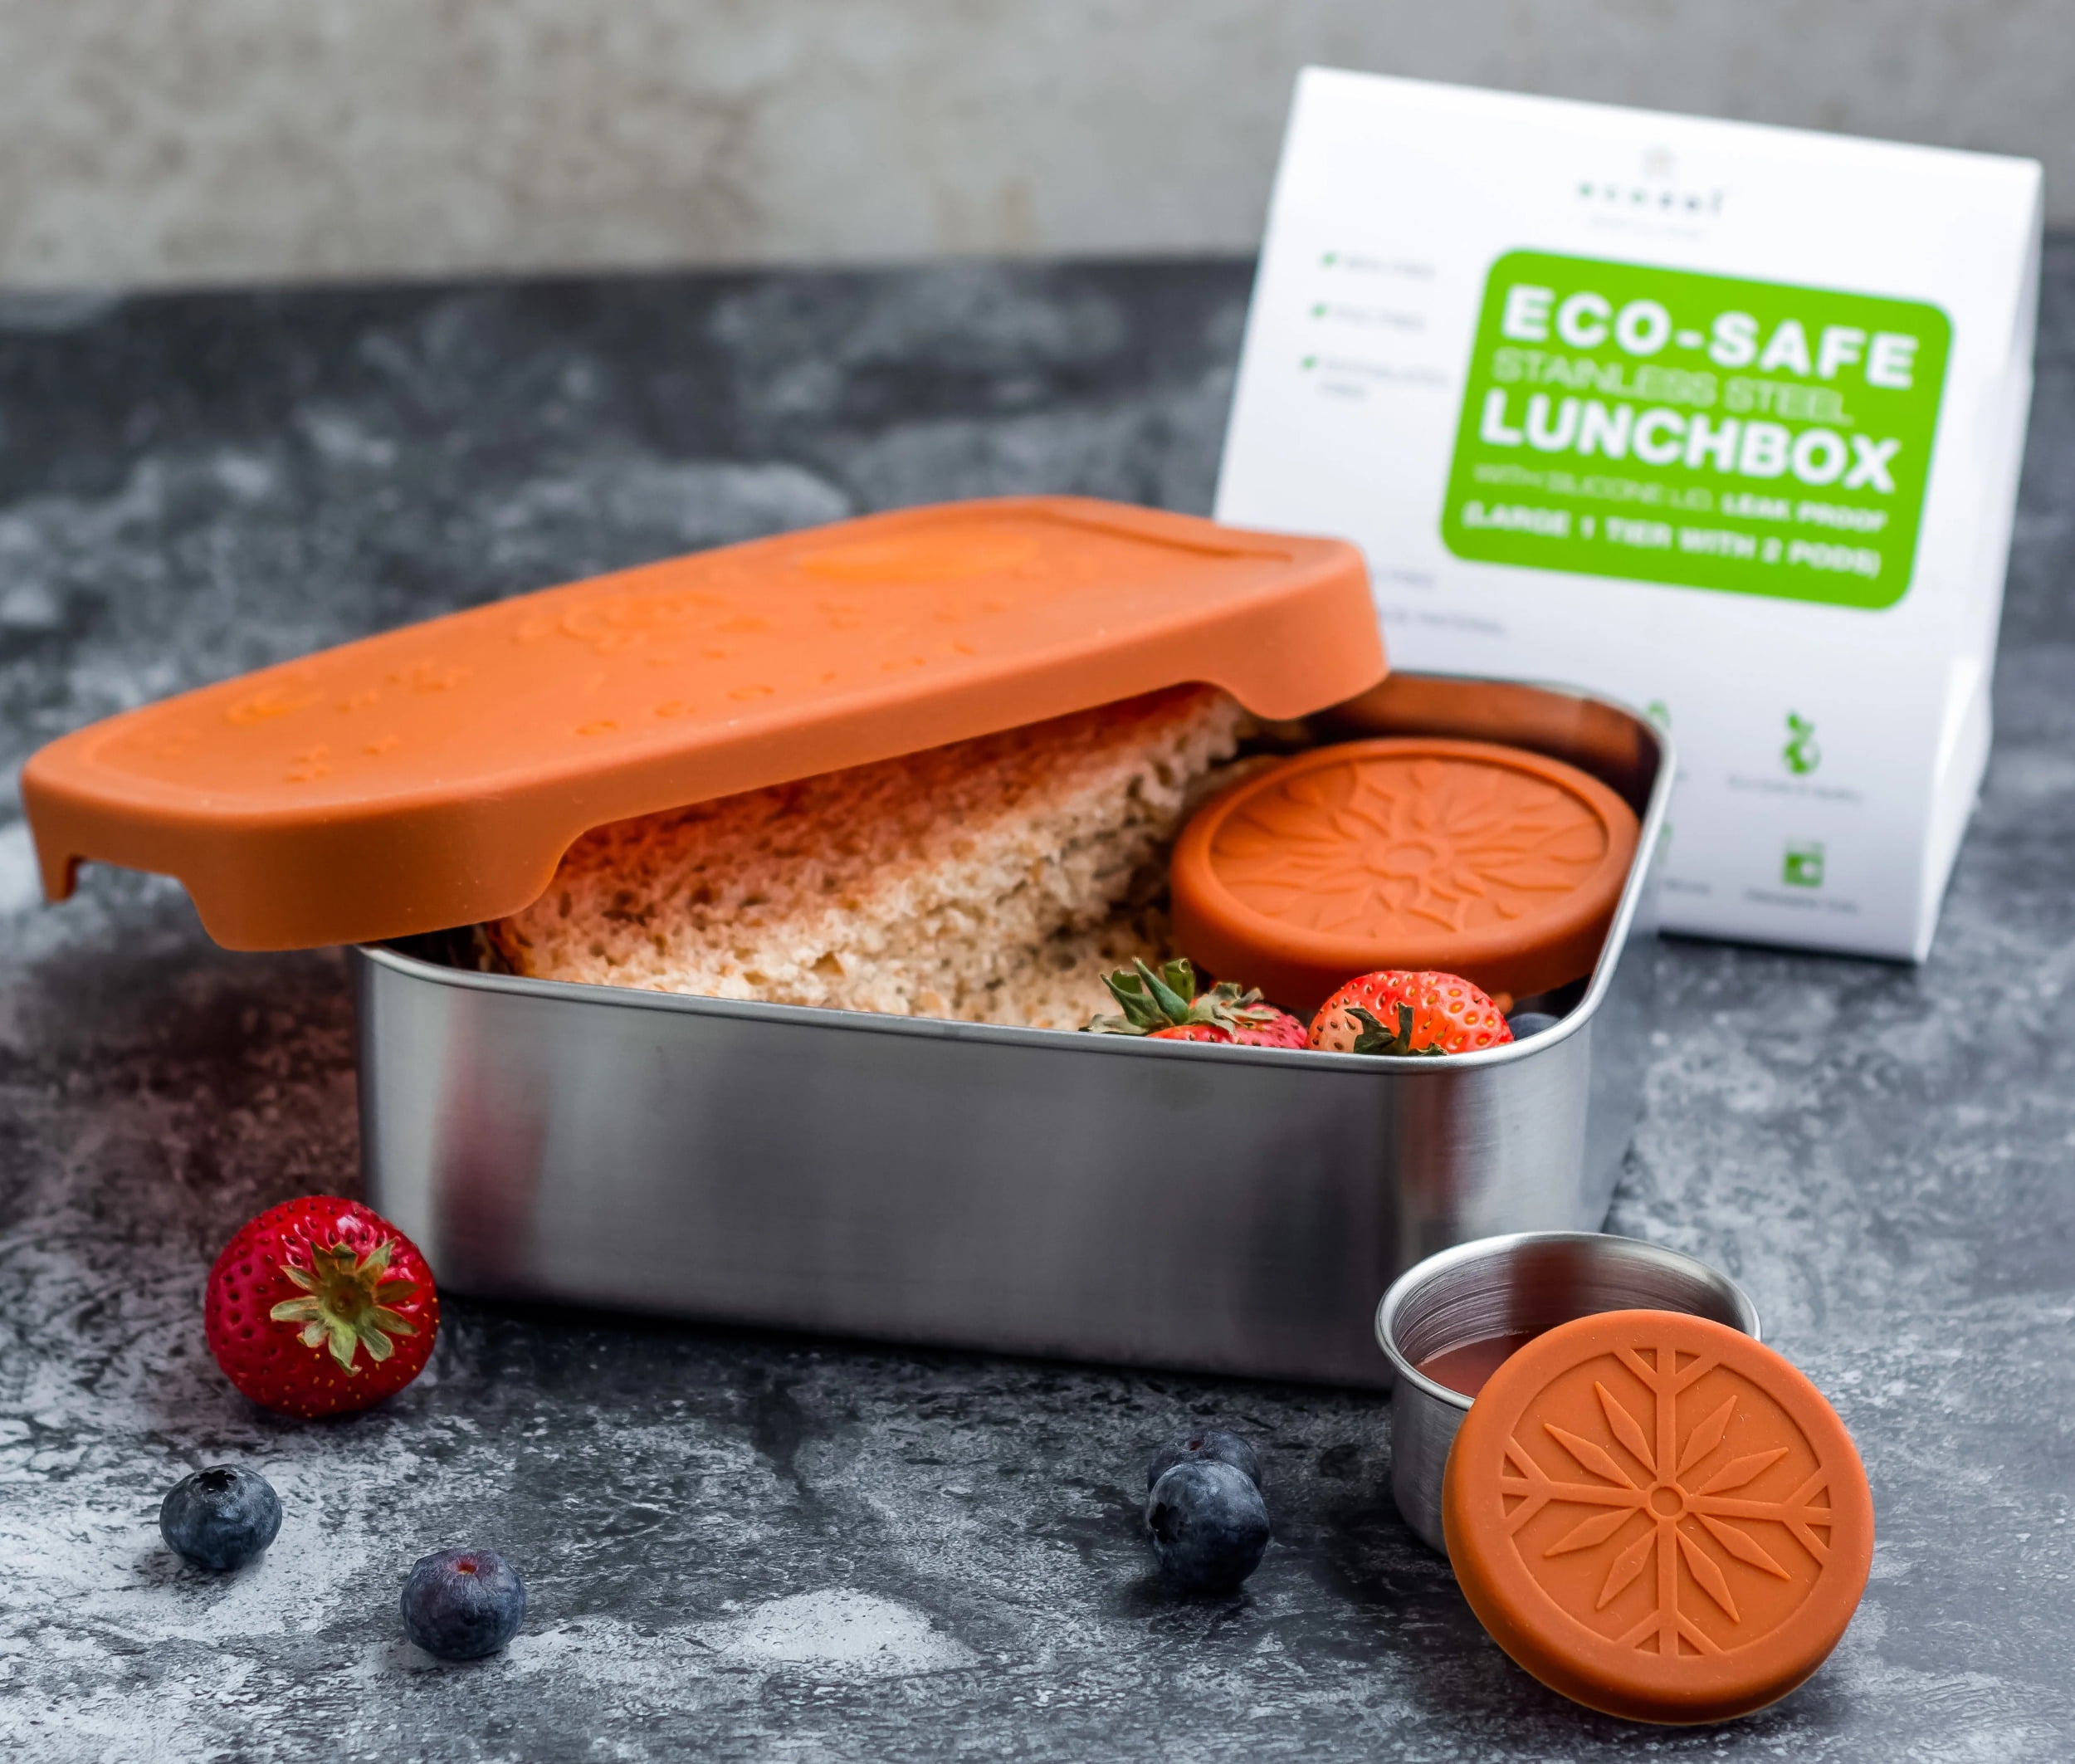 Ecozoi Stainless Steel Lunch Box Food Pack - LEAK PROOF with BONUS POD and Locking Clips, 1000 ml Capacity